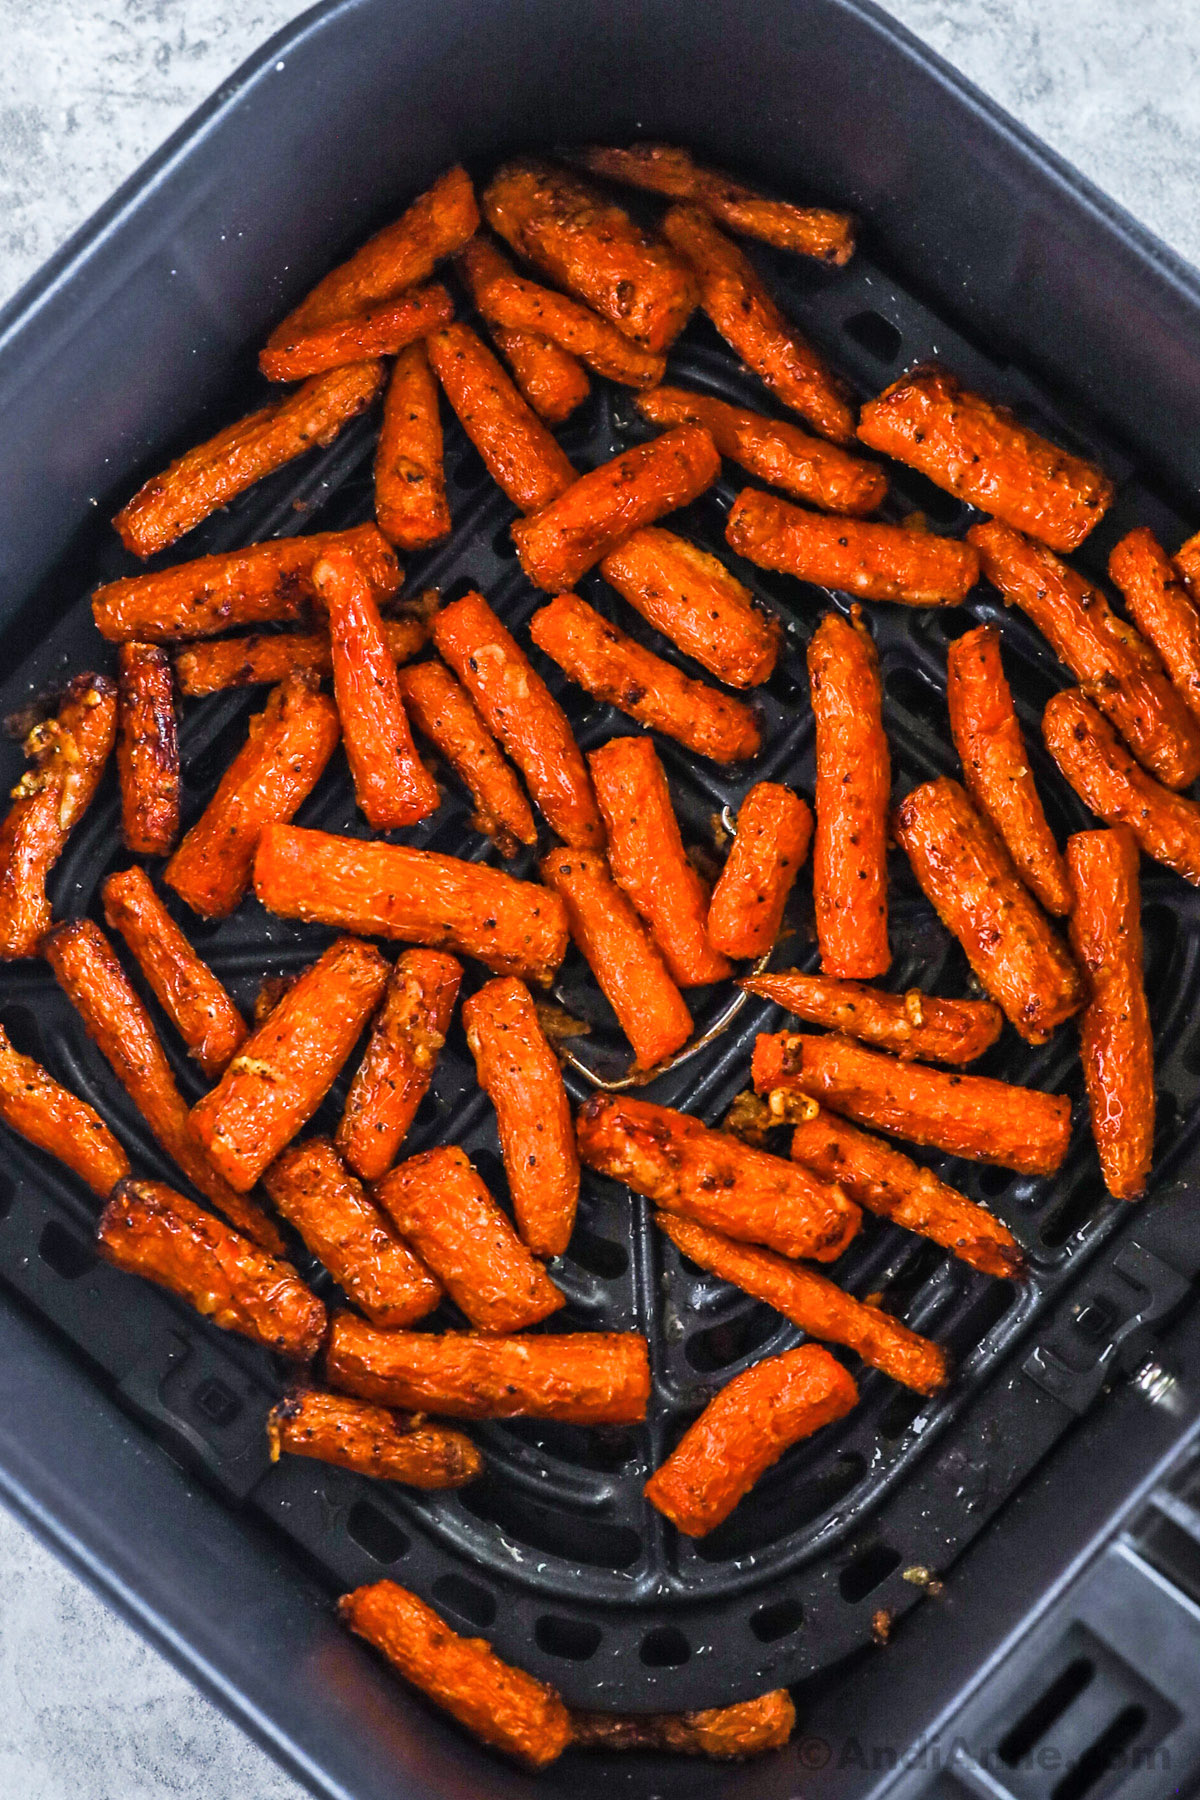 An air fryer basket with cooked carrots inside.